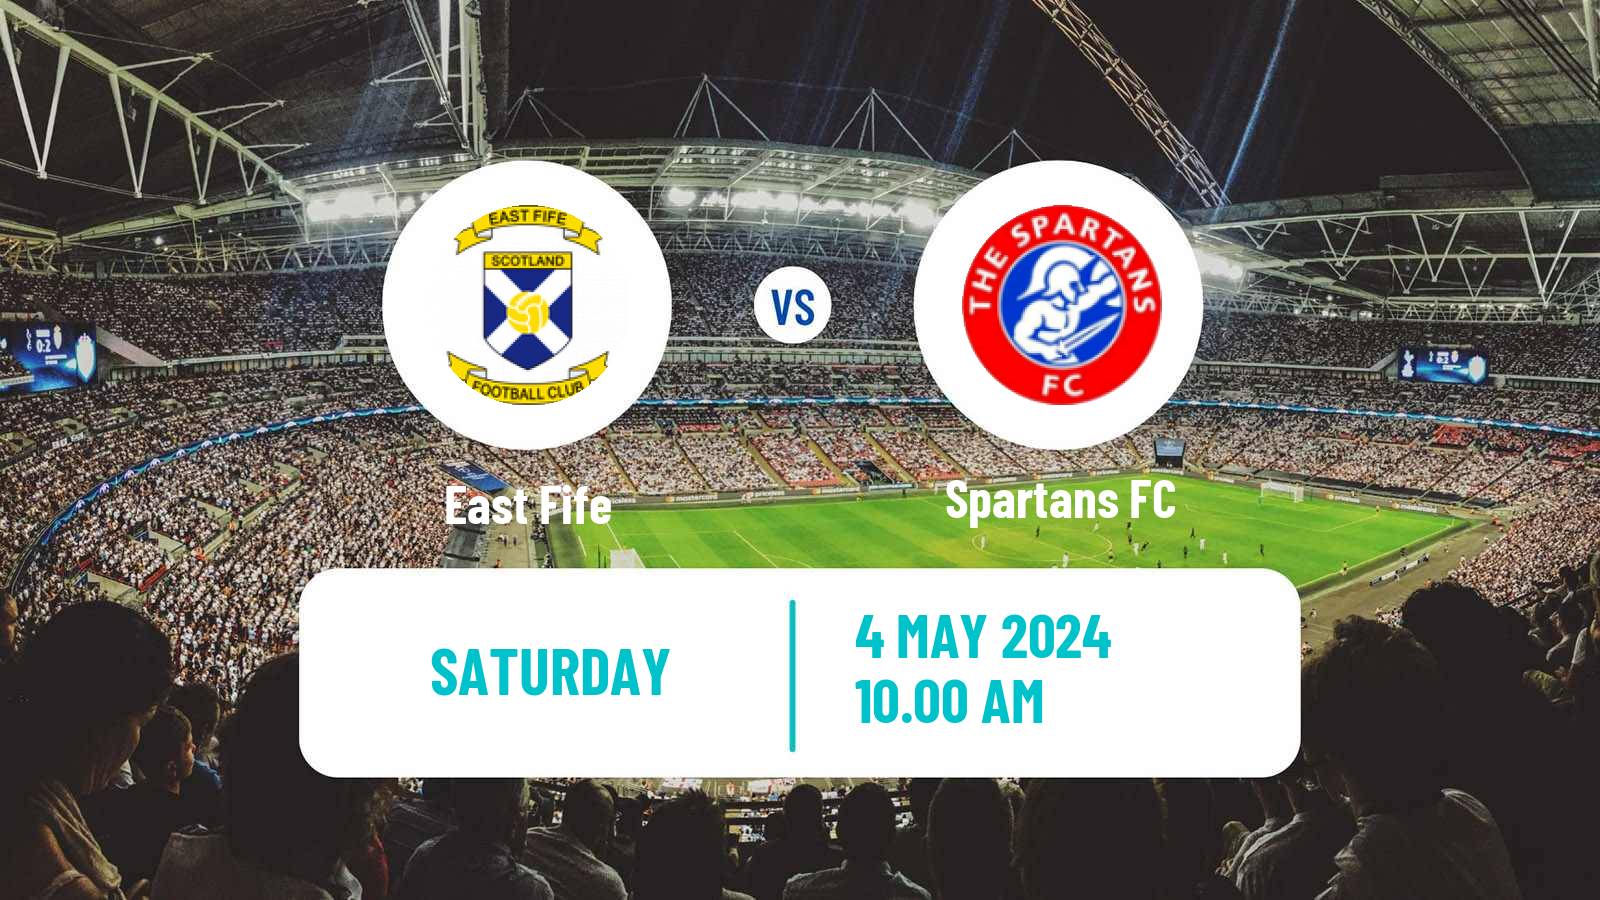 Soccer Scottish League Two East Fife - Spartans